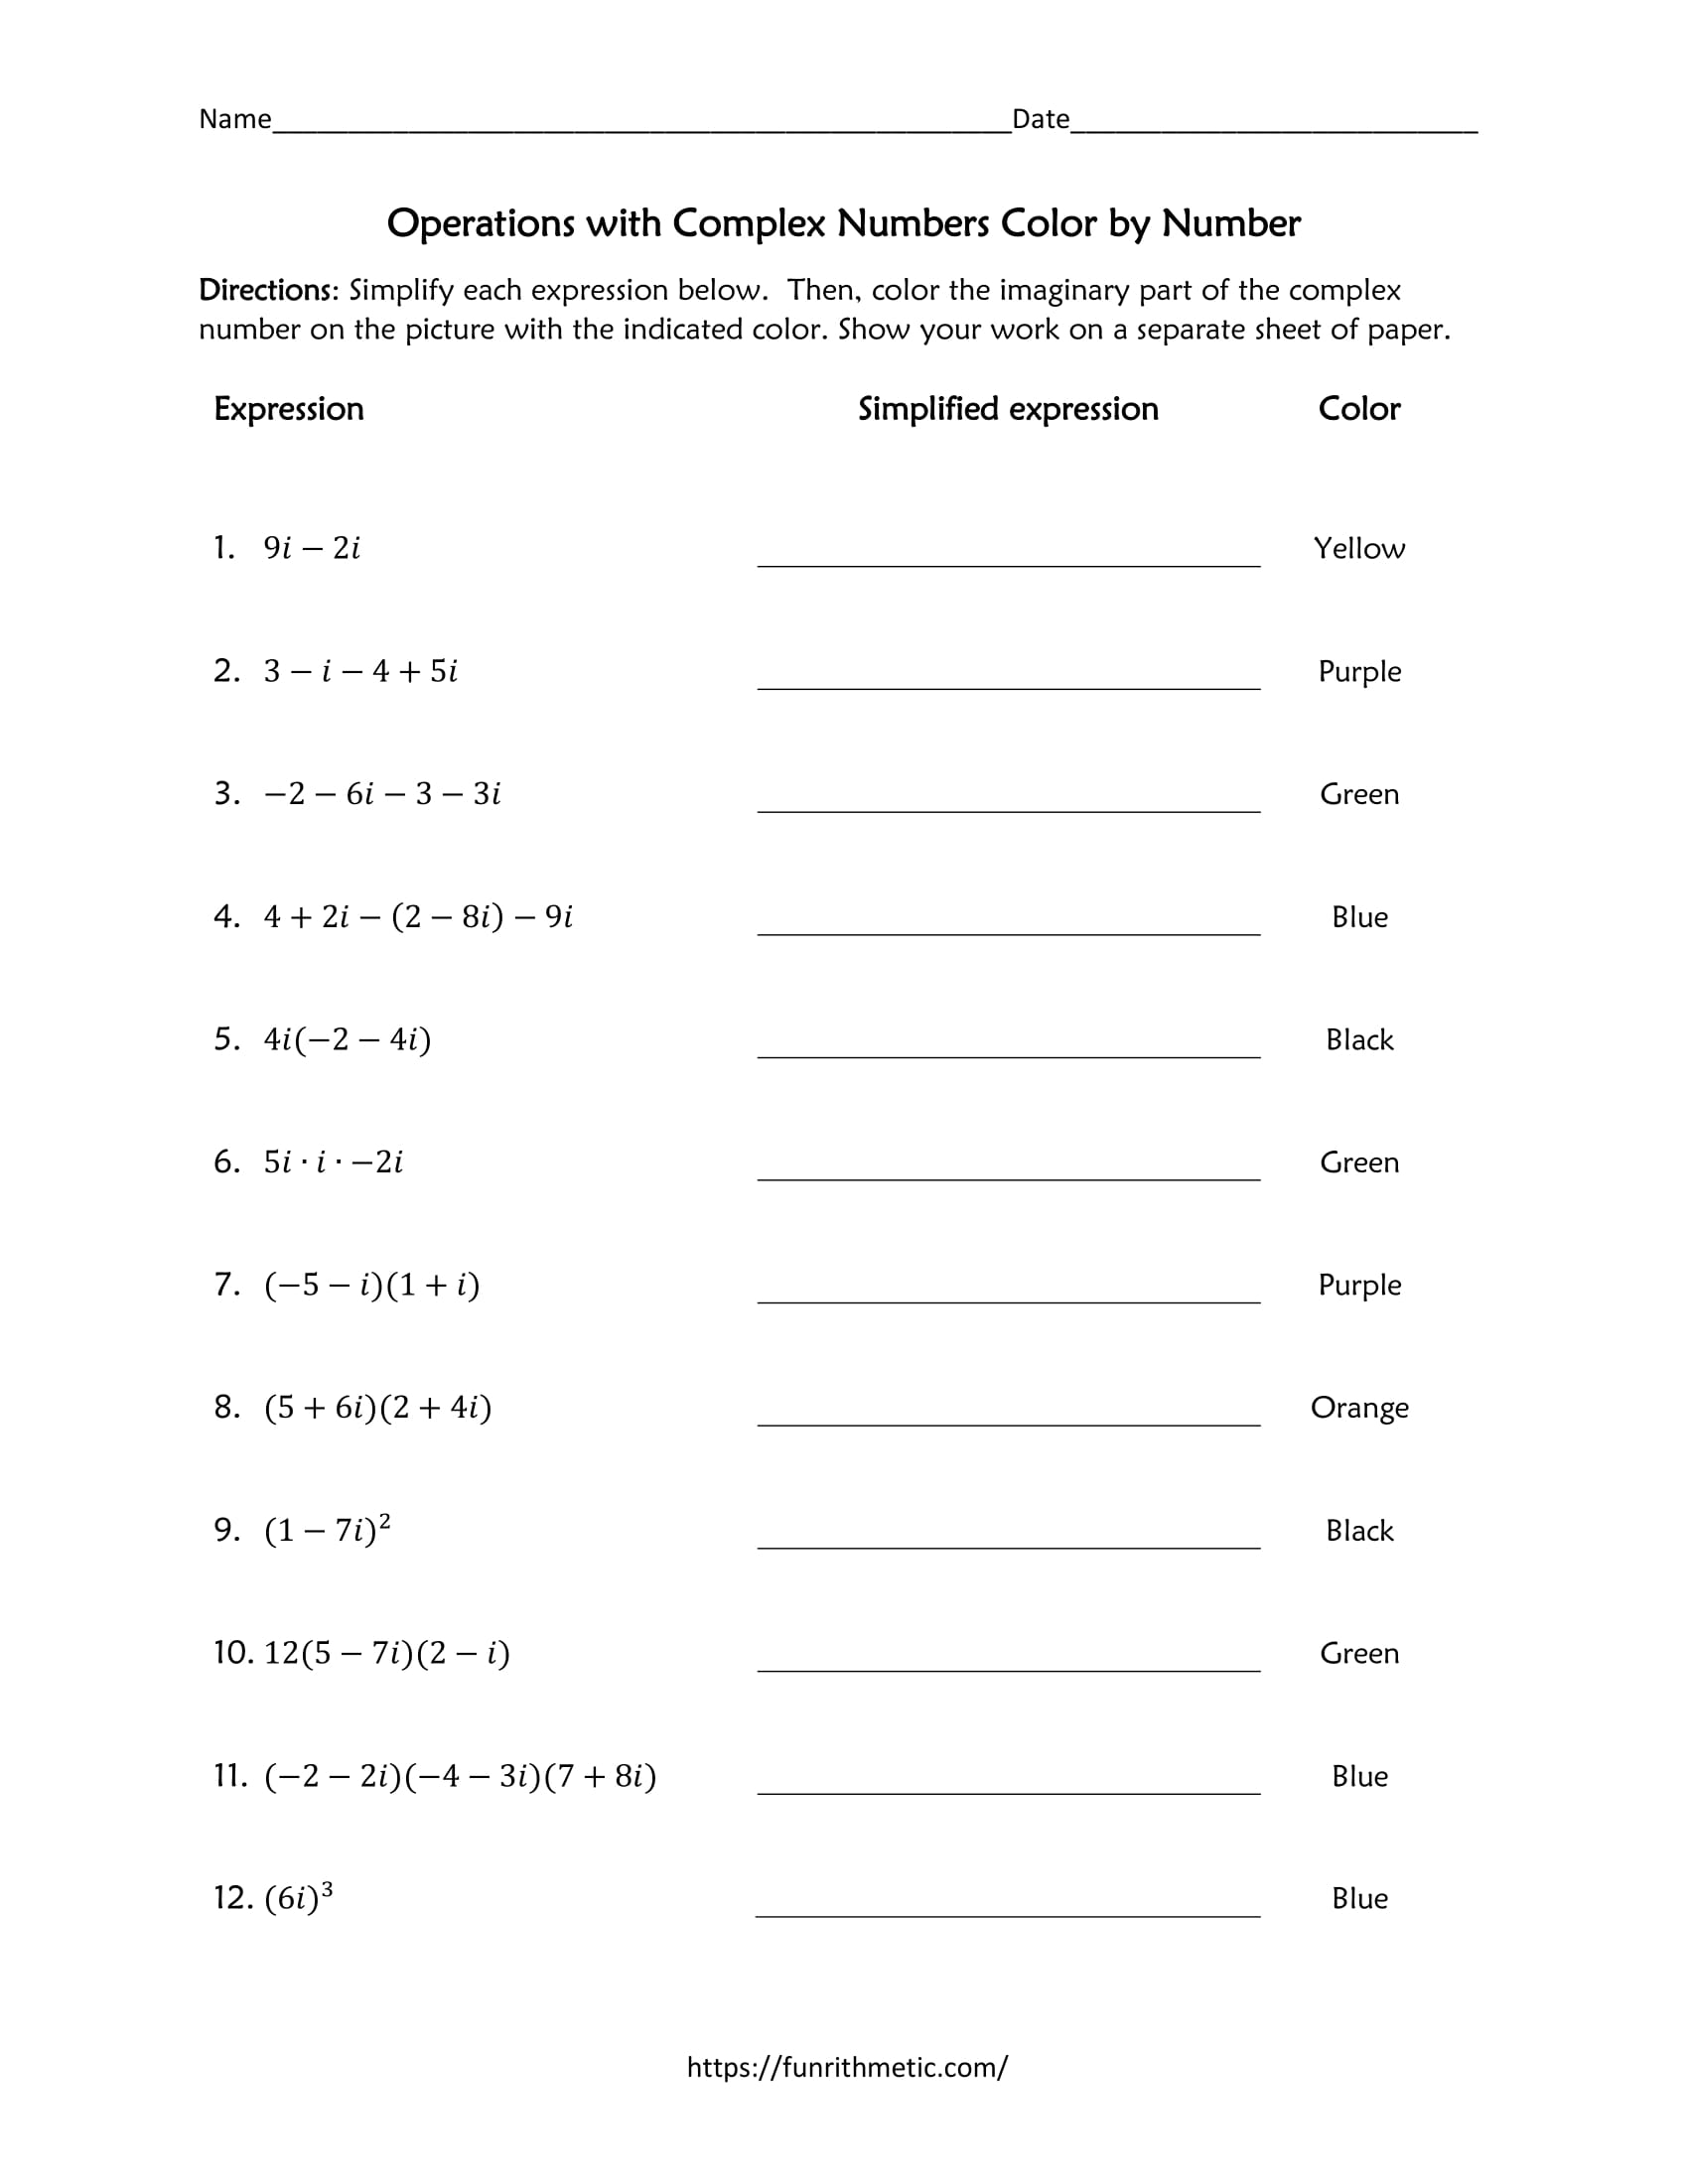 Operations with Complex Numbers Color by Number For Multiplying Complex Numbers Worksheet